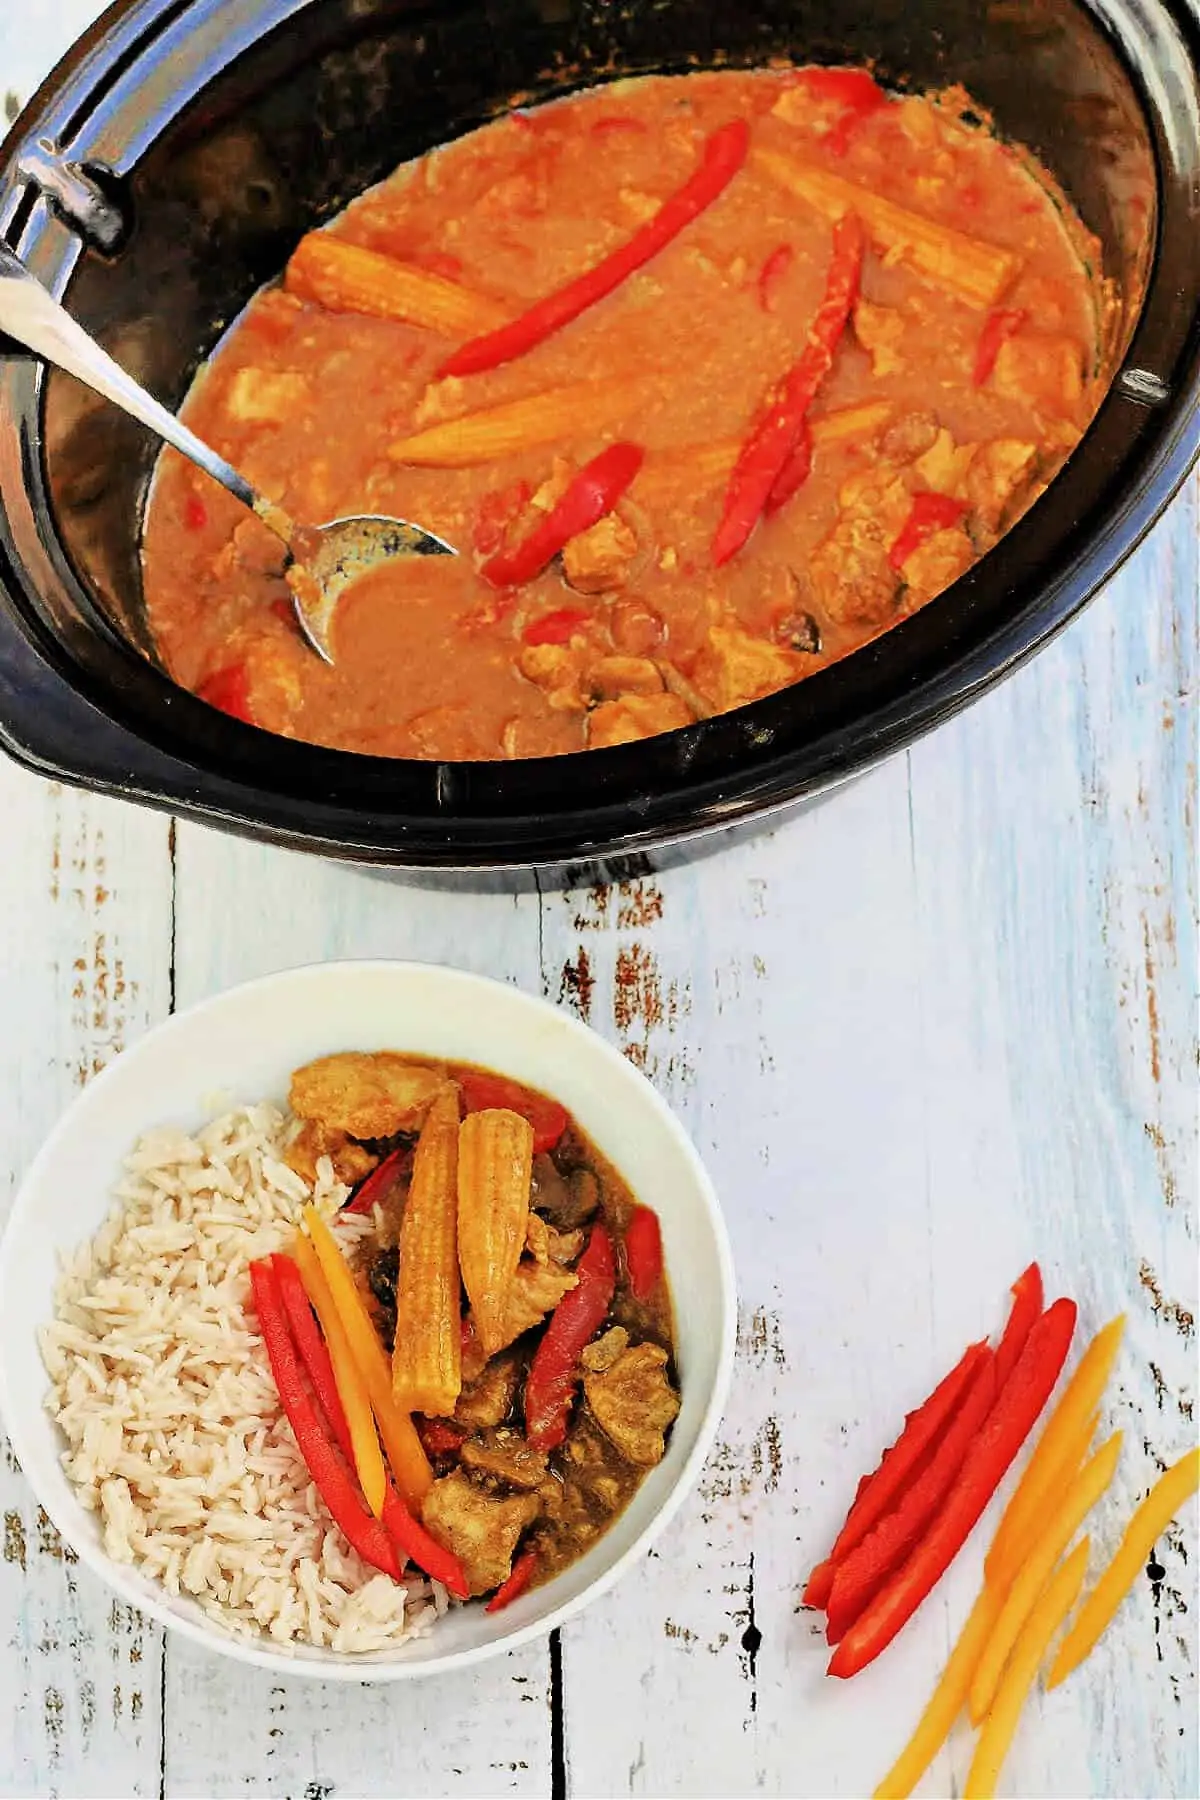 Slow cooker pot serving out Chinese curry with a bowl of curry and rice below.